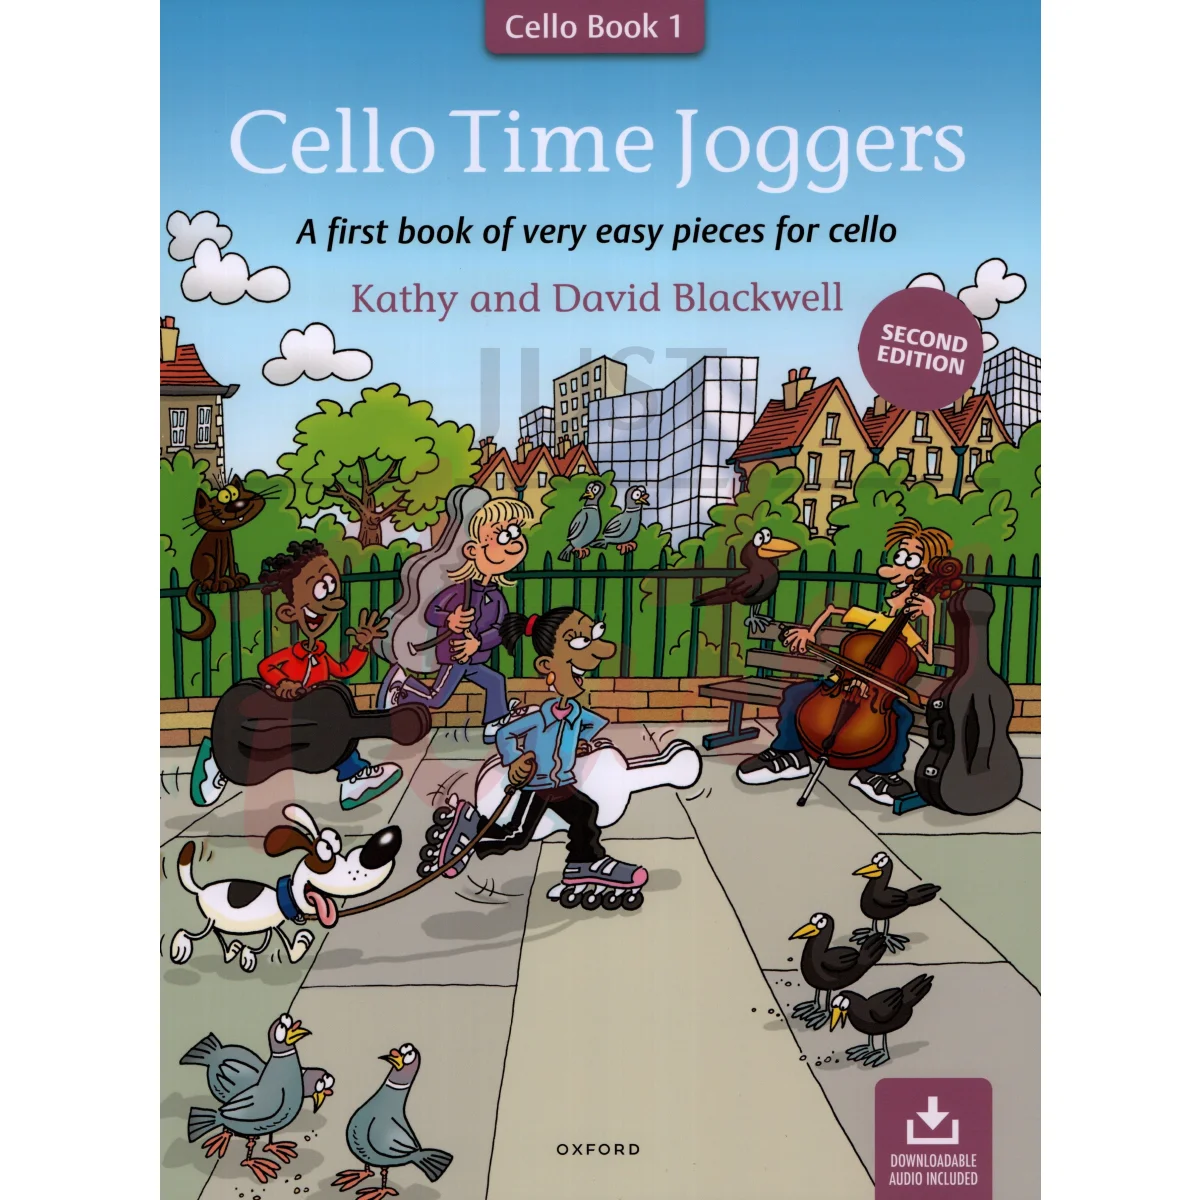 Cello Time Joggers (2nd Edition)